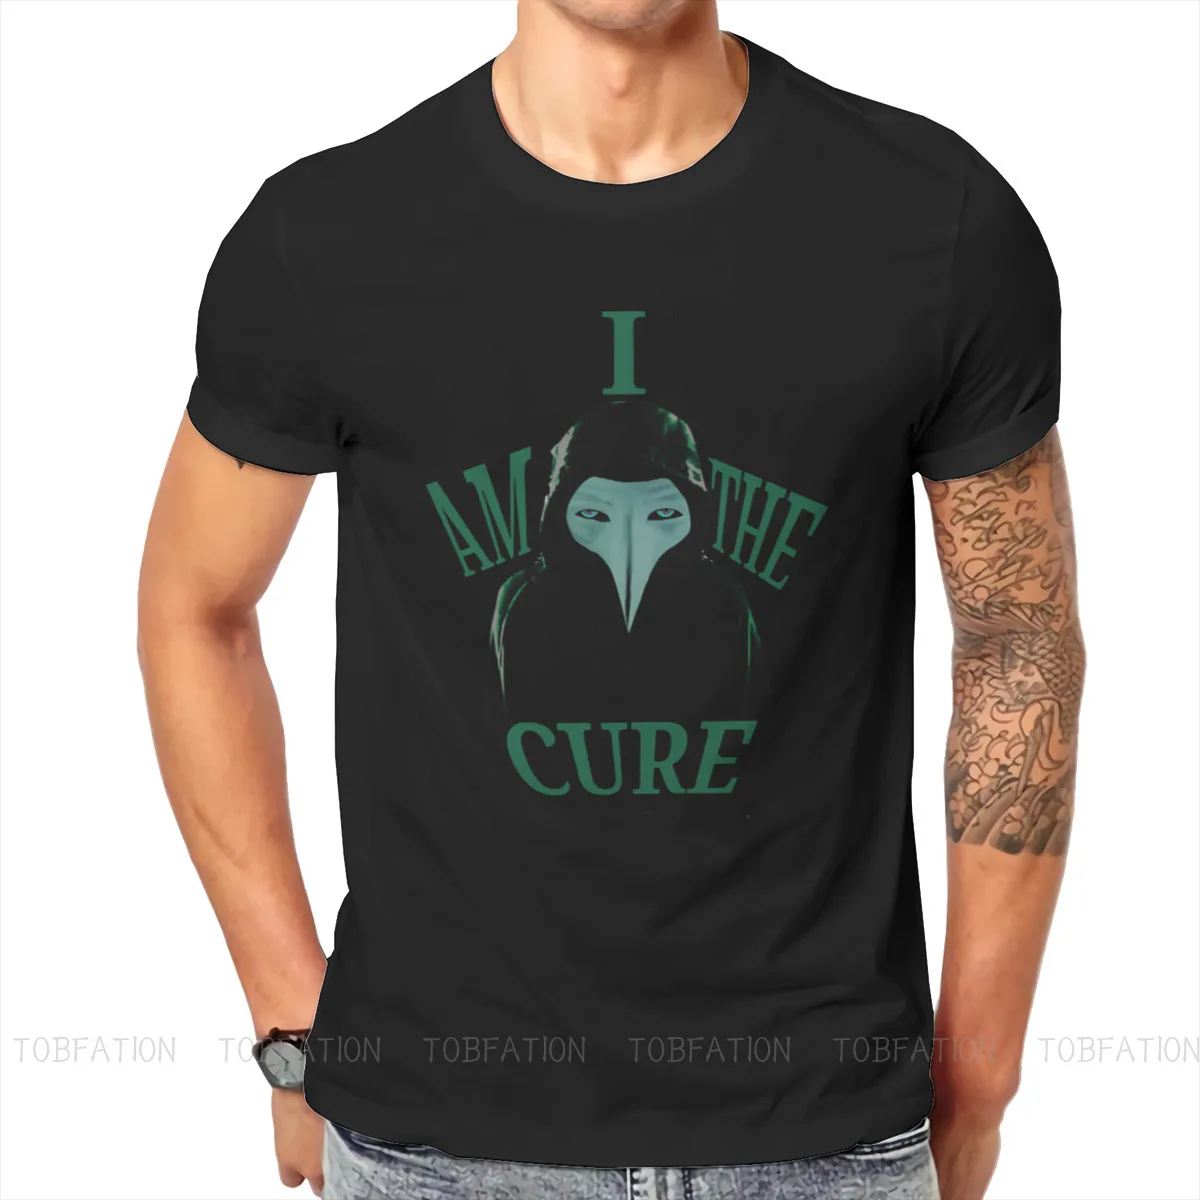 

SCP Foundation Fictional Organization Newest TShirt for Men 049 IS THE CURE Pure Cotton T Shirt Hip Hop Gifts Streetwear